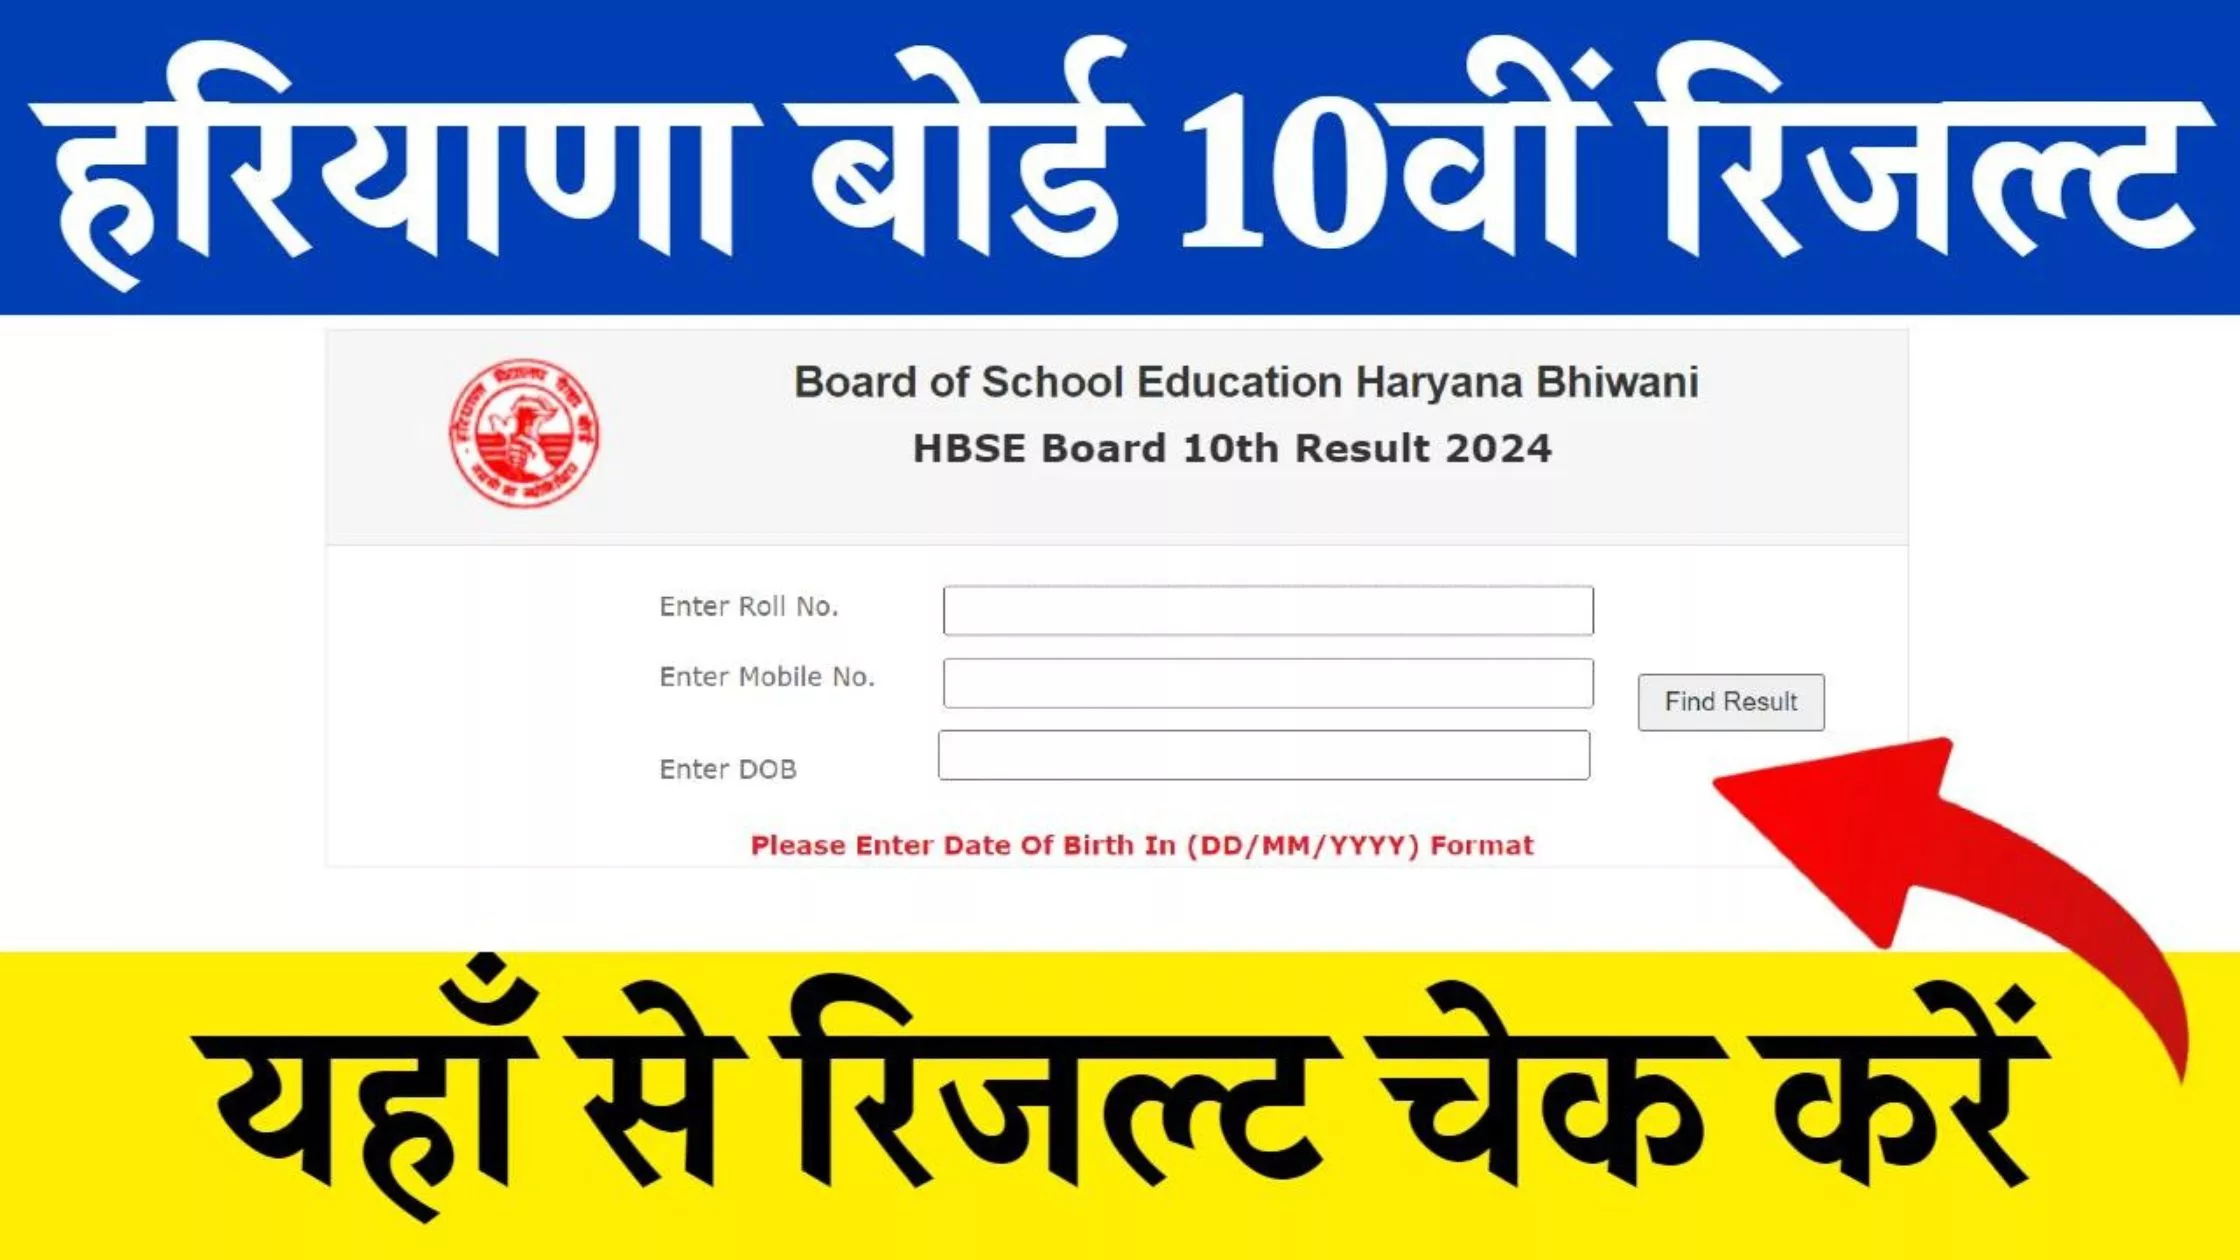 HBSE 10th Result 2024 declared, students can check their results at bseh.org.in